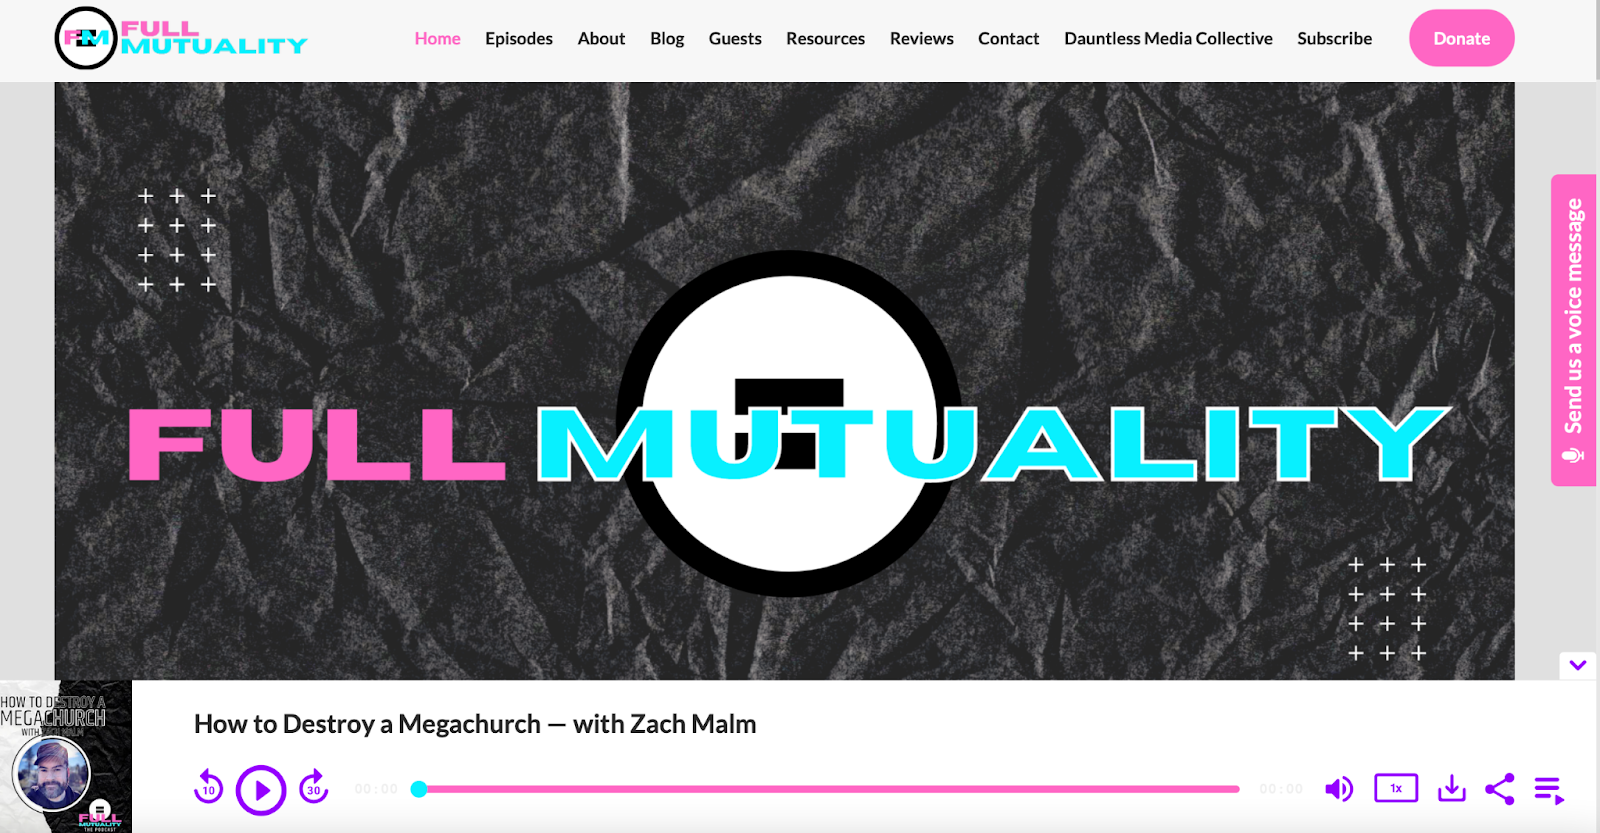 Full Mutuality podcast website